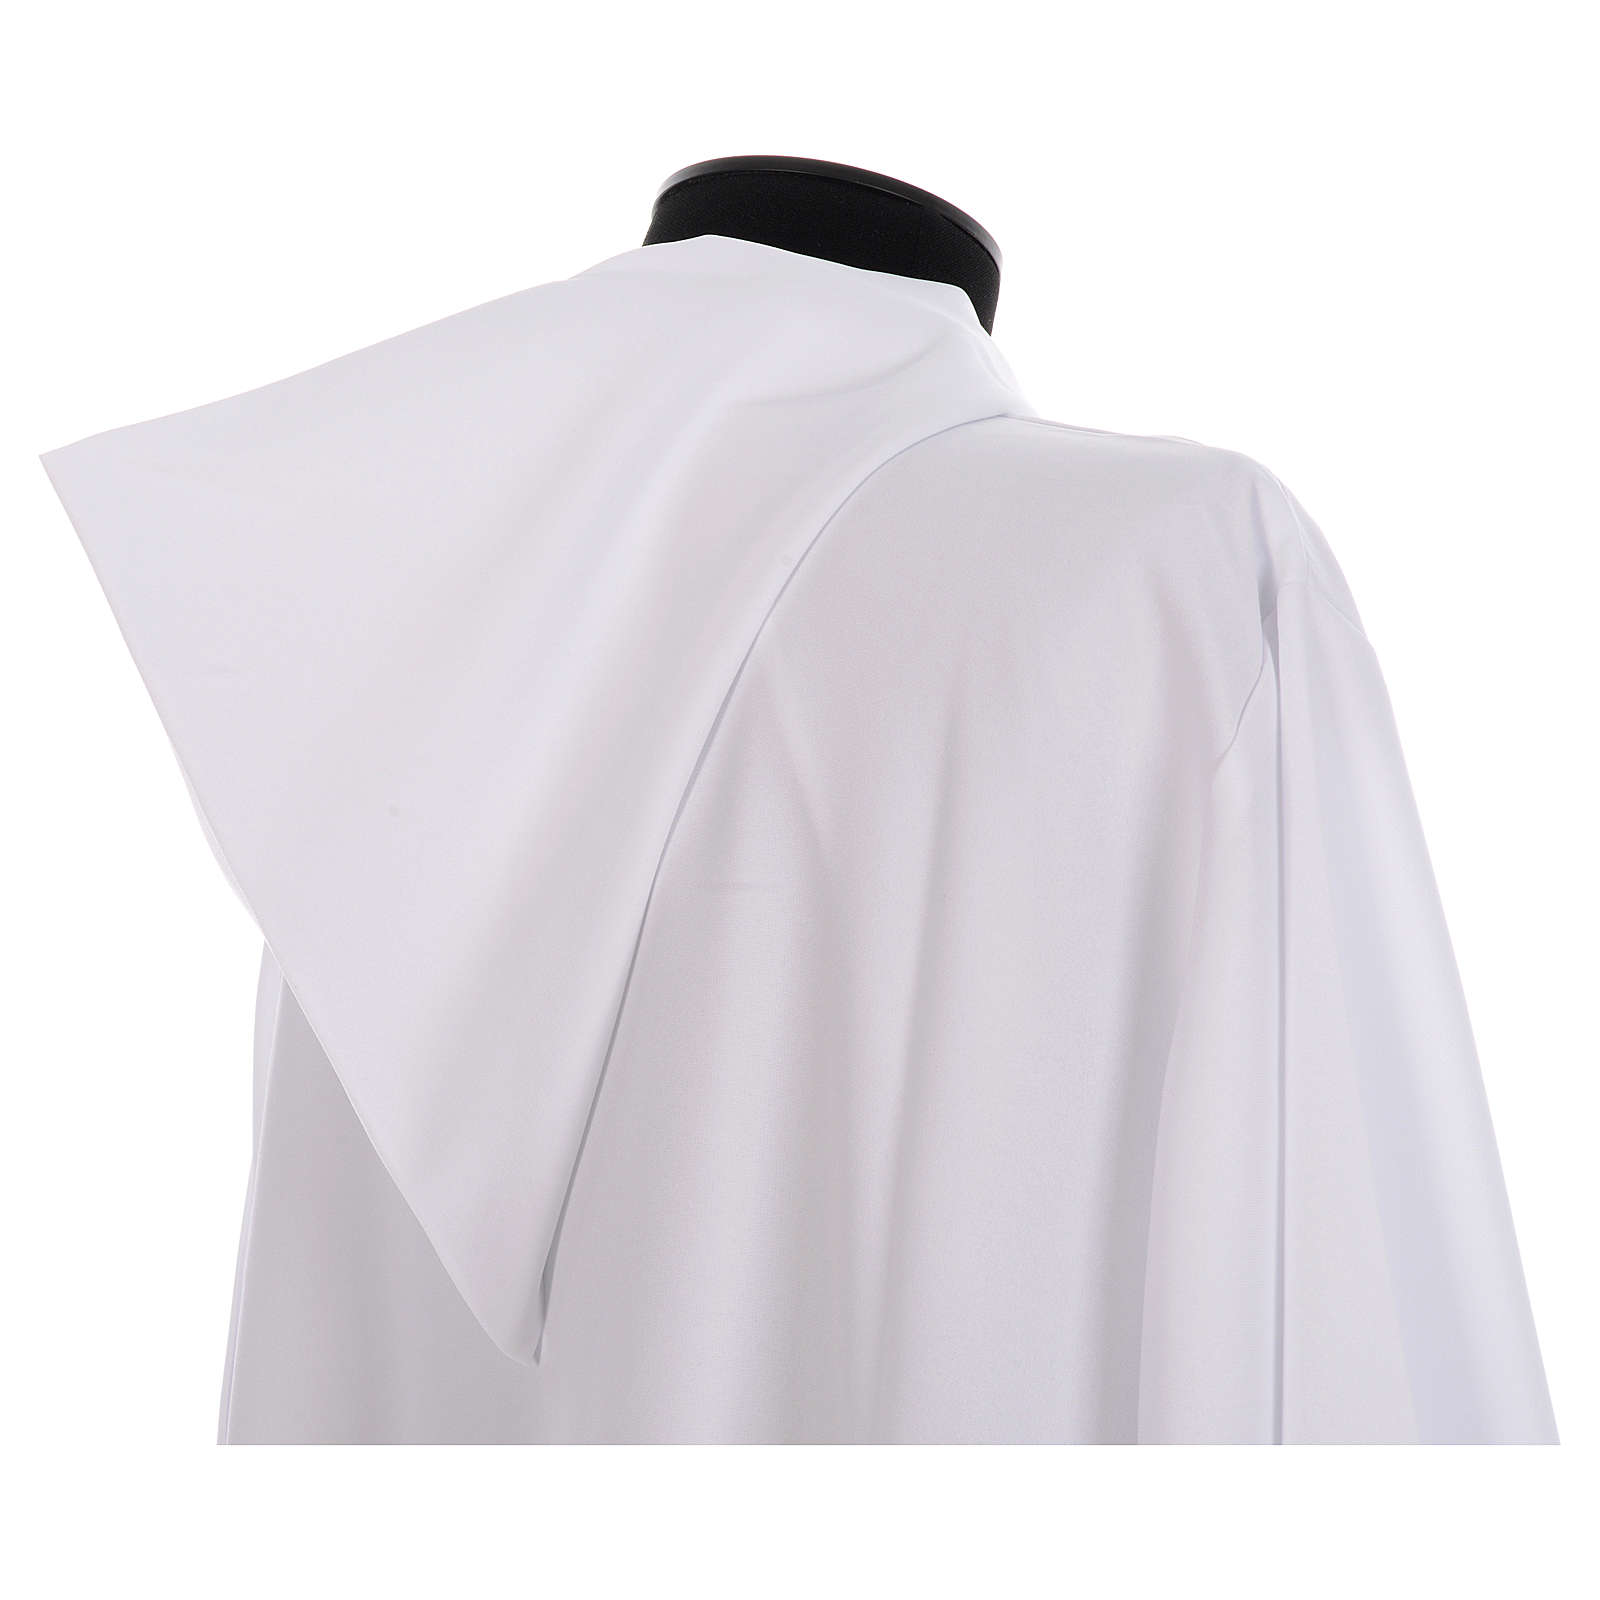 Liturgical alb with hood made in polyester | online sales on HOLYART.co.uk